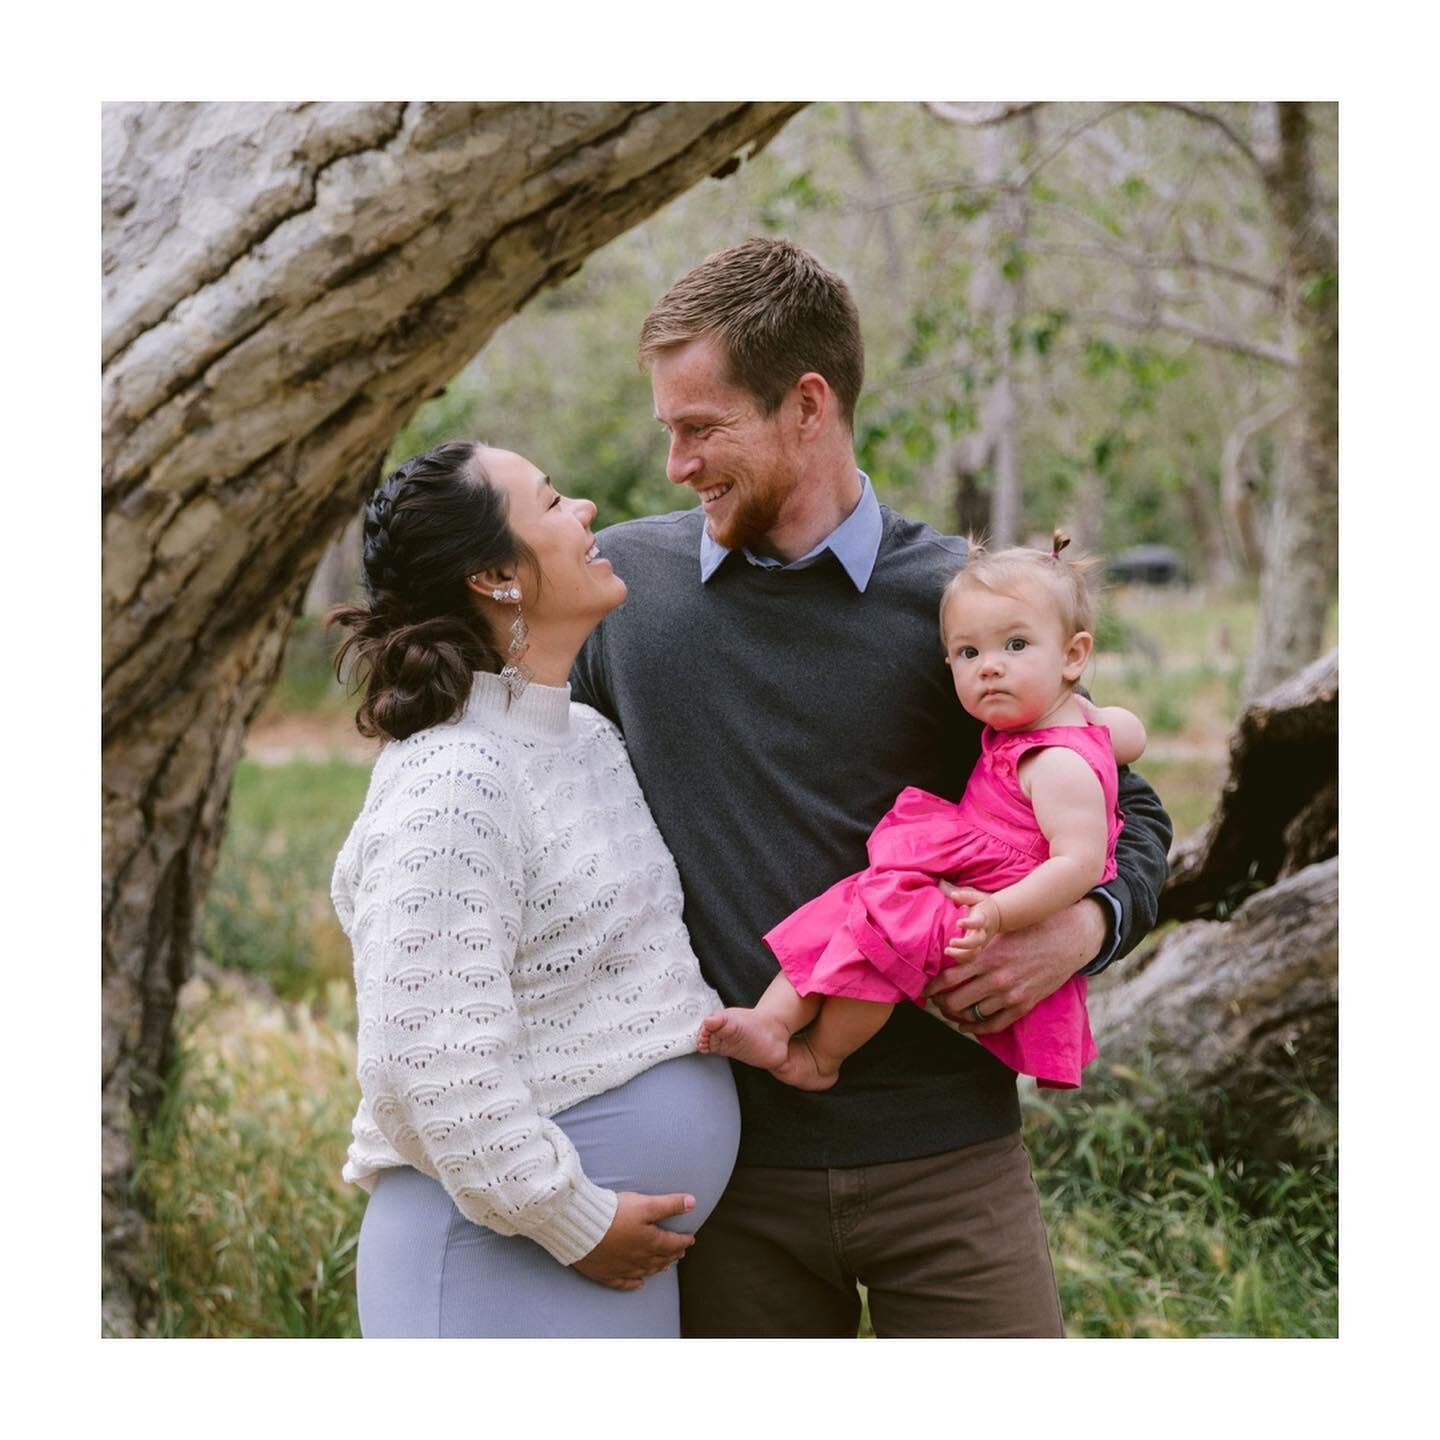 Capturing moments of anticipation and love amidst the lush greenery. Since taking these photos, they have welcomed another baby girl into the world. Now a family of four, embracing the beauty of spring! 

#FamilyBloom #SpringJoy #GrowingTogether #Spr